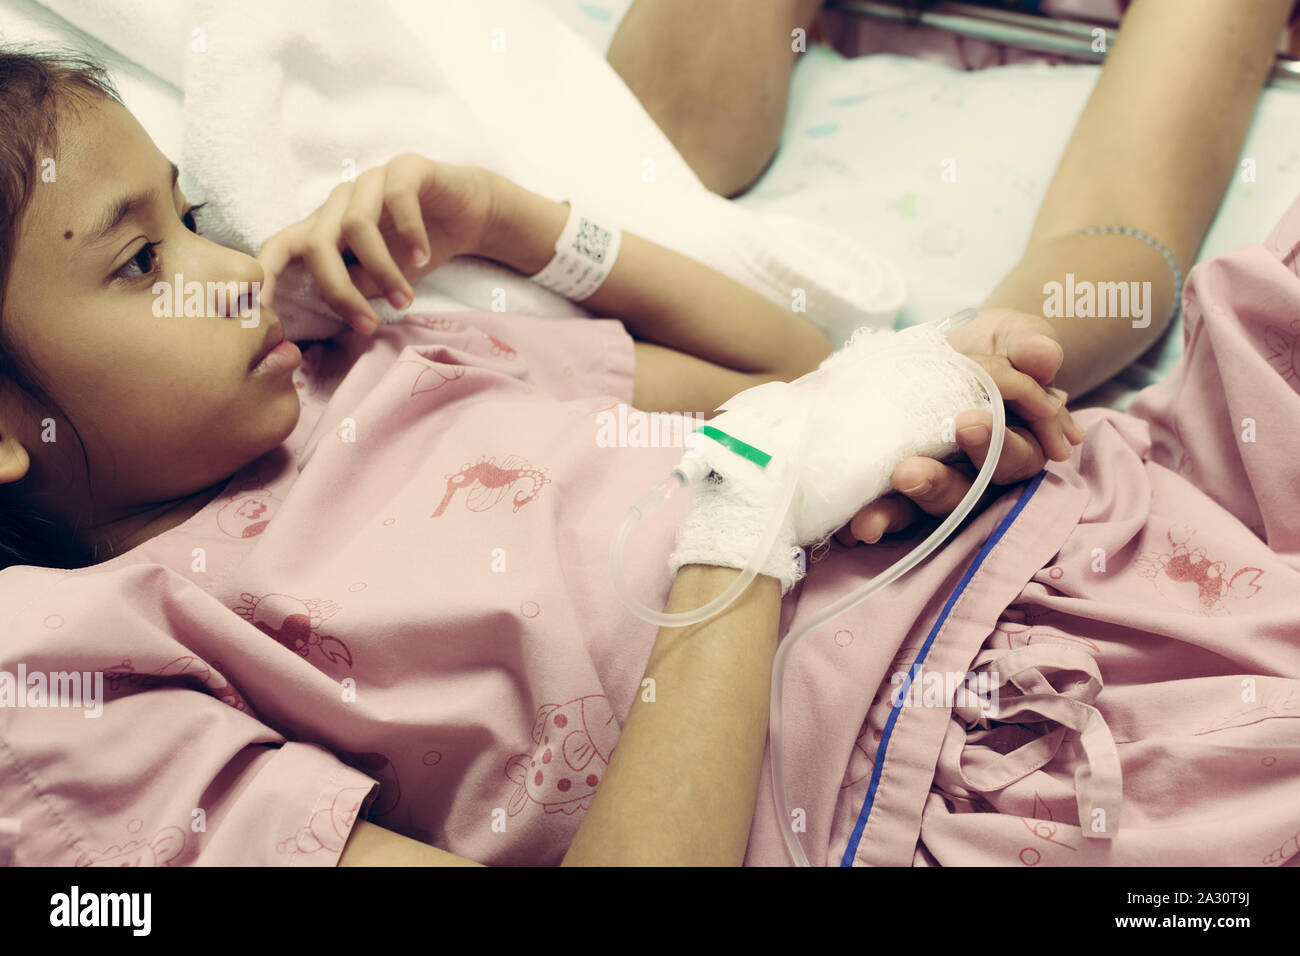 Young daughter sick in hospital and her hand is holding by her mother with care Stock Photo